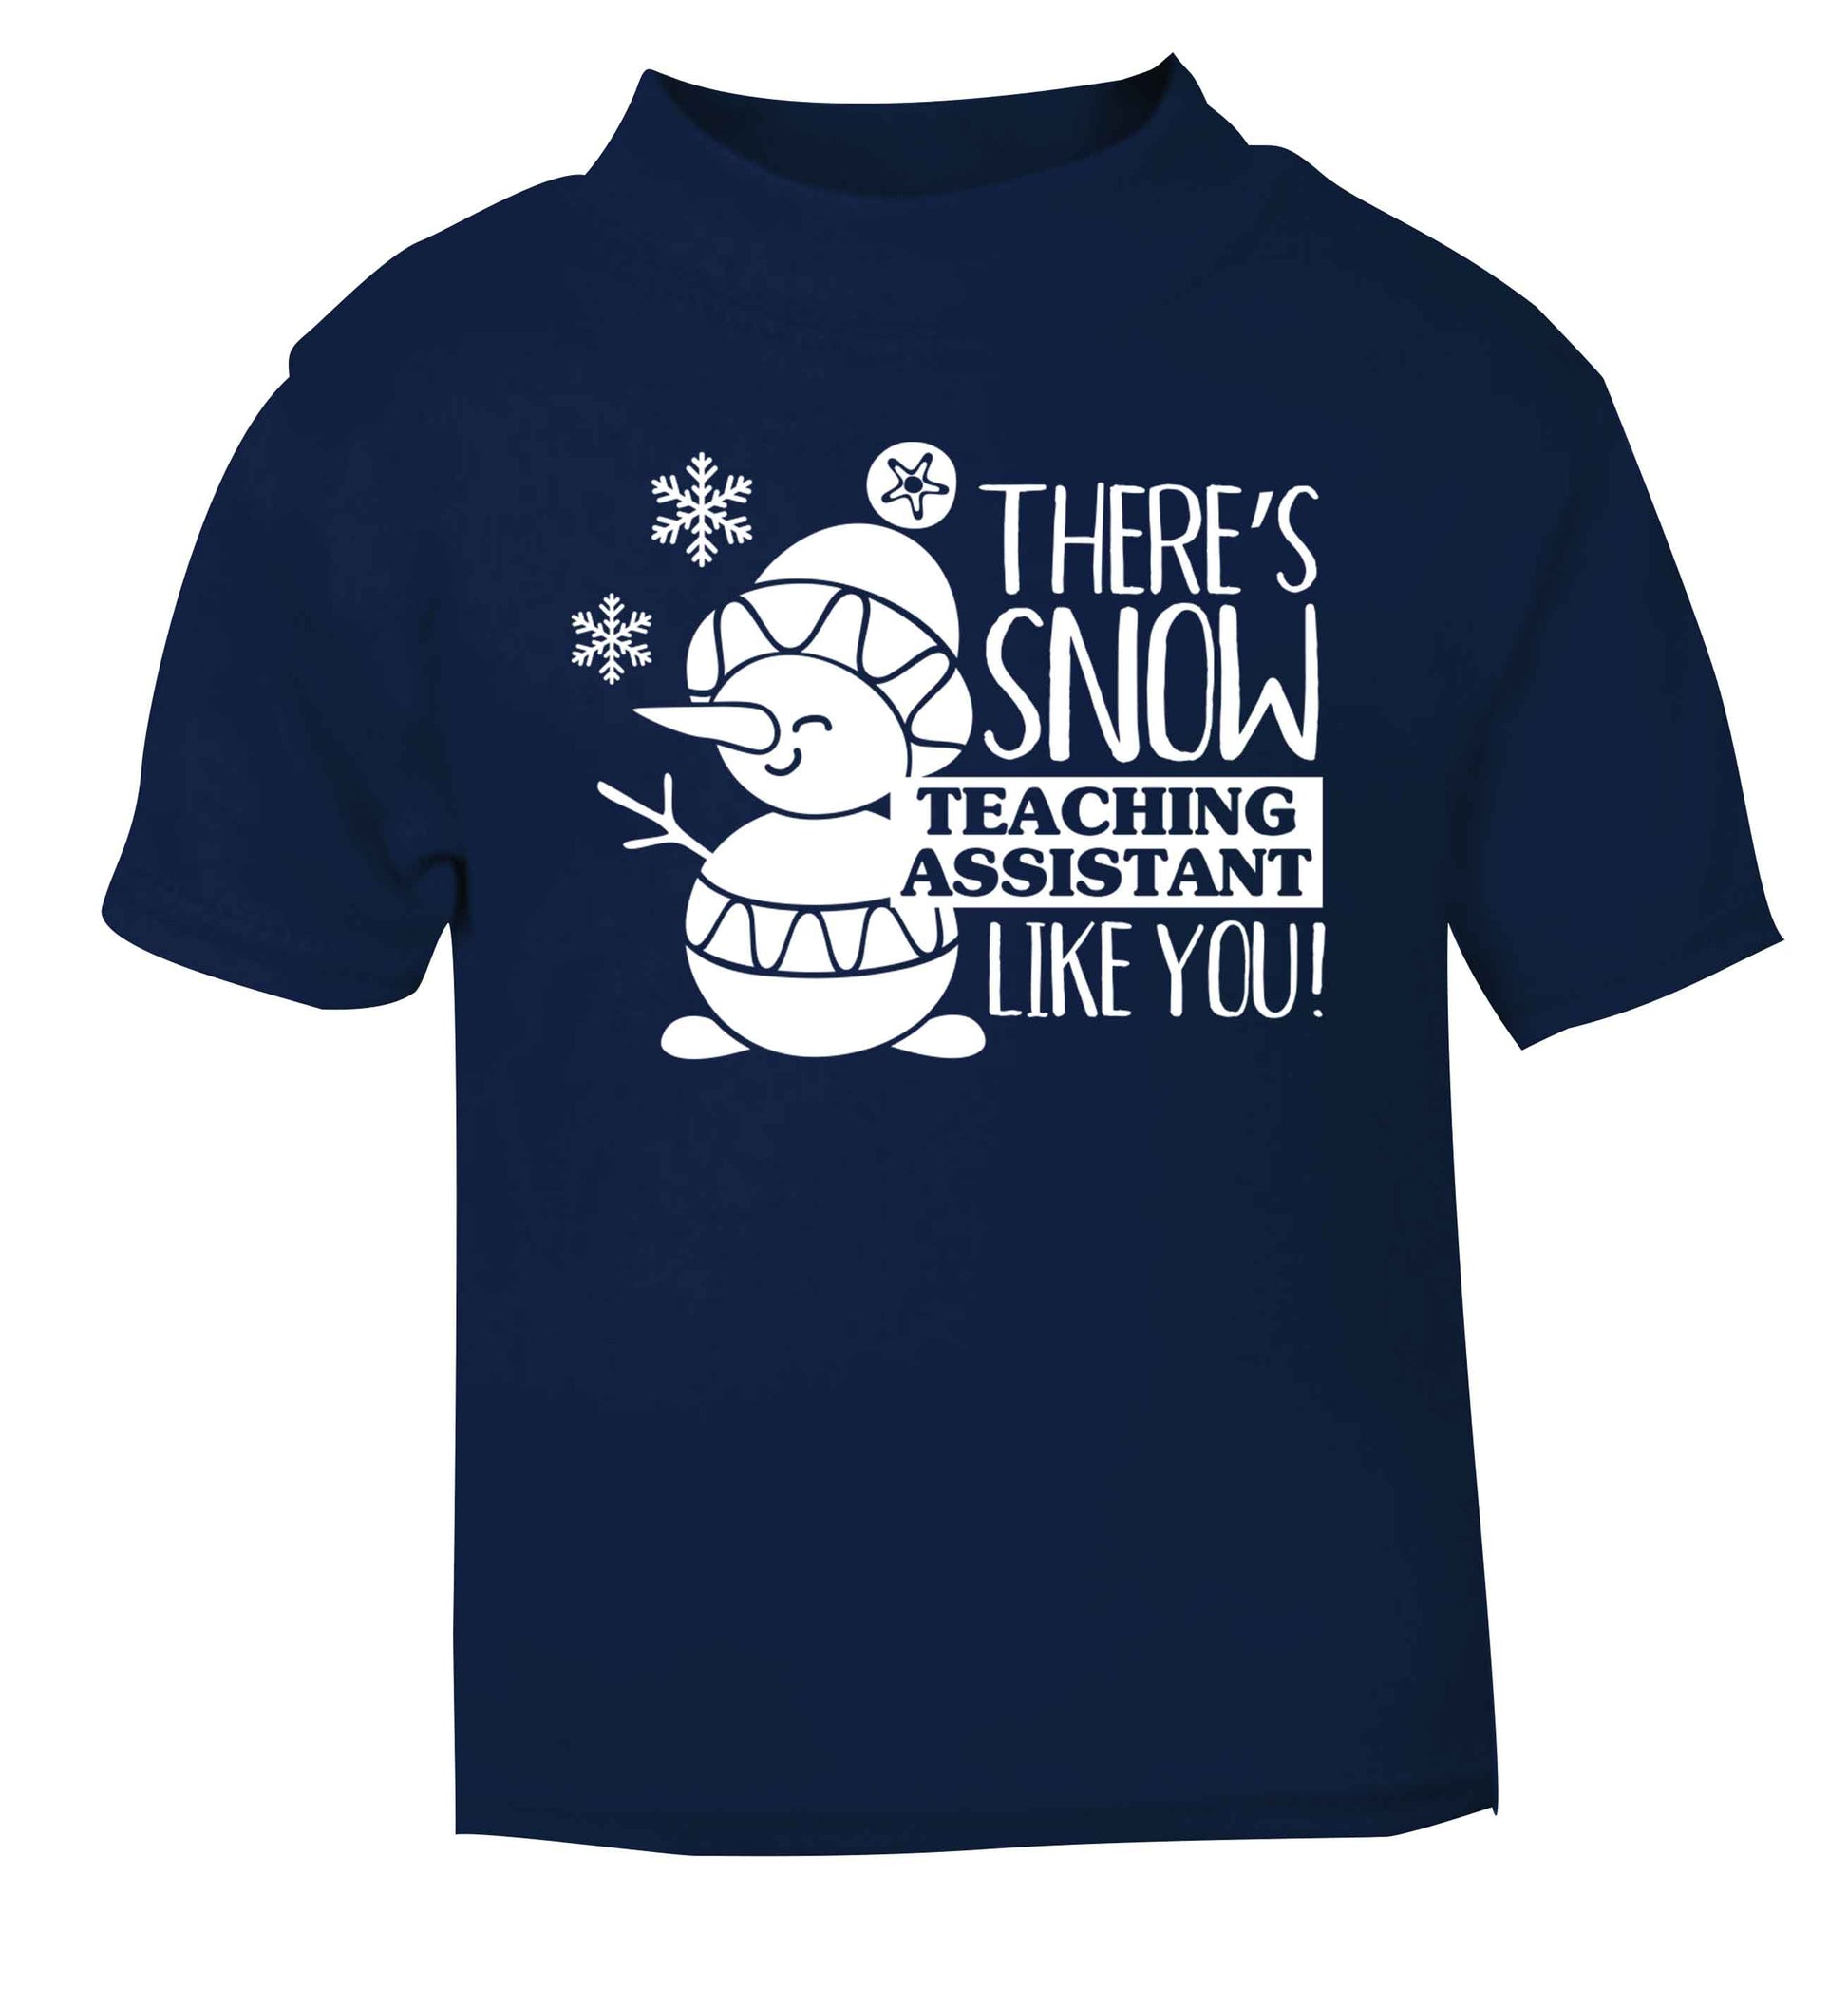 There's snow teaching assistant like you navy baby toddler Tshirt 2 Years